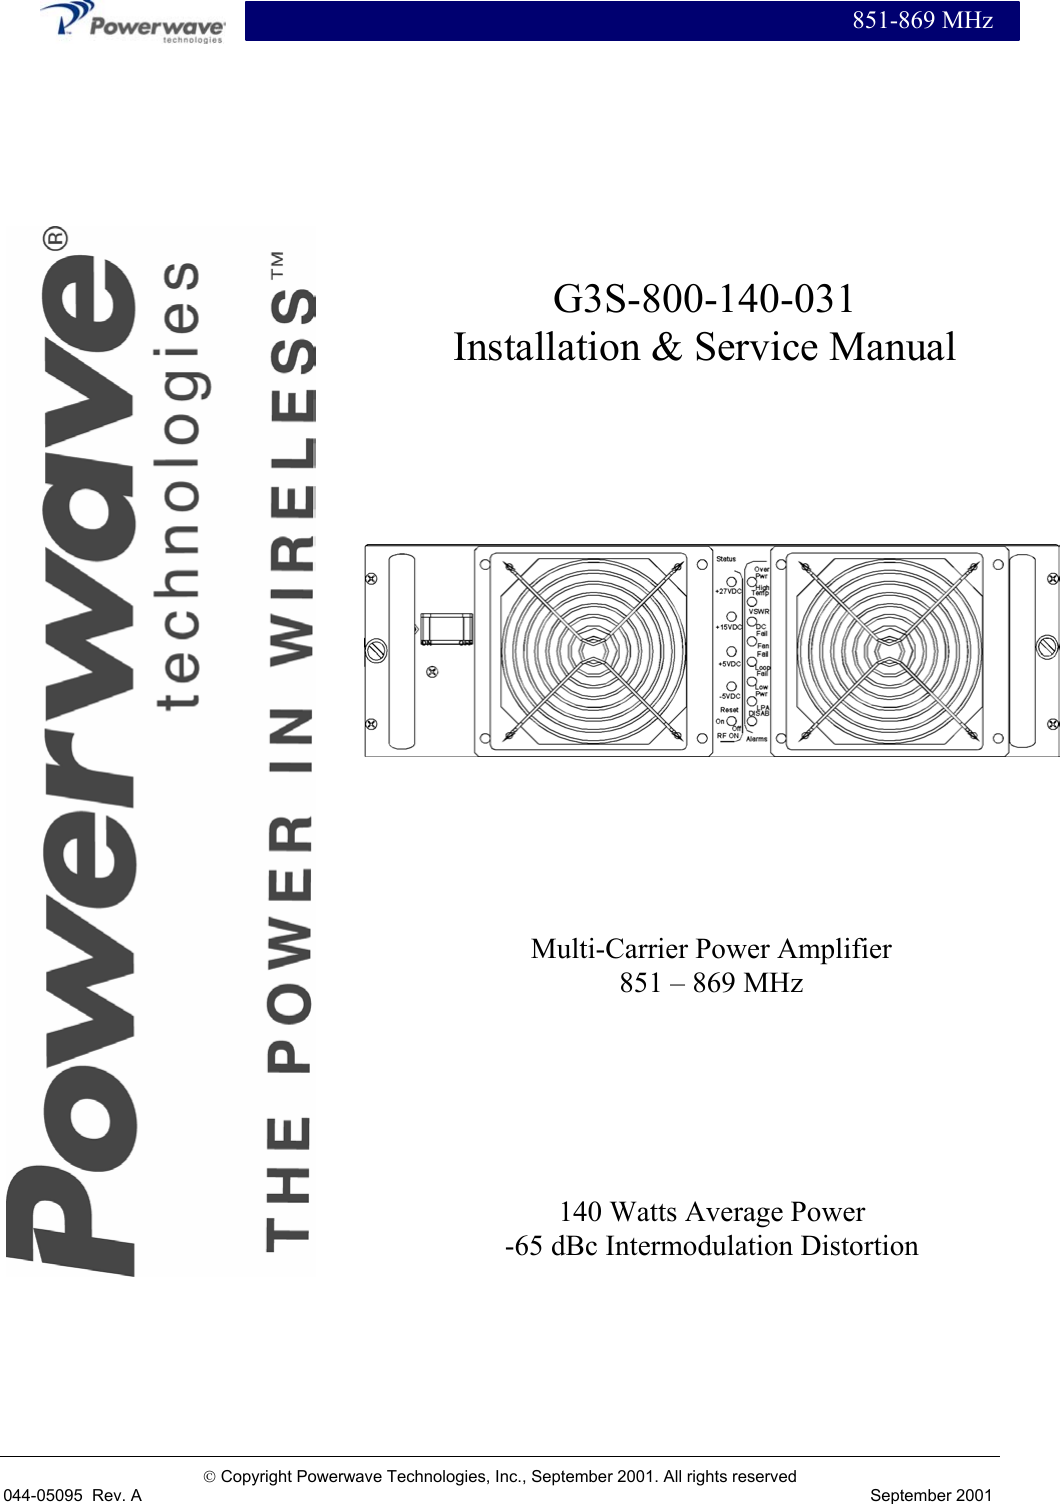  851-869 MHz   Copyright Powerwave Technologies, Inc., September 2001. All rights reserved 044-05095  Rev. A September 2001                     Multi-Carrier Power Amplifier 851 – 869 MHz G3S-800-140-031 Installation &amp; Service Manual 140 Watts Average Power -65 dBc Intermodulation Distortion 